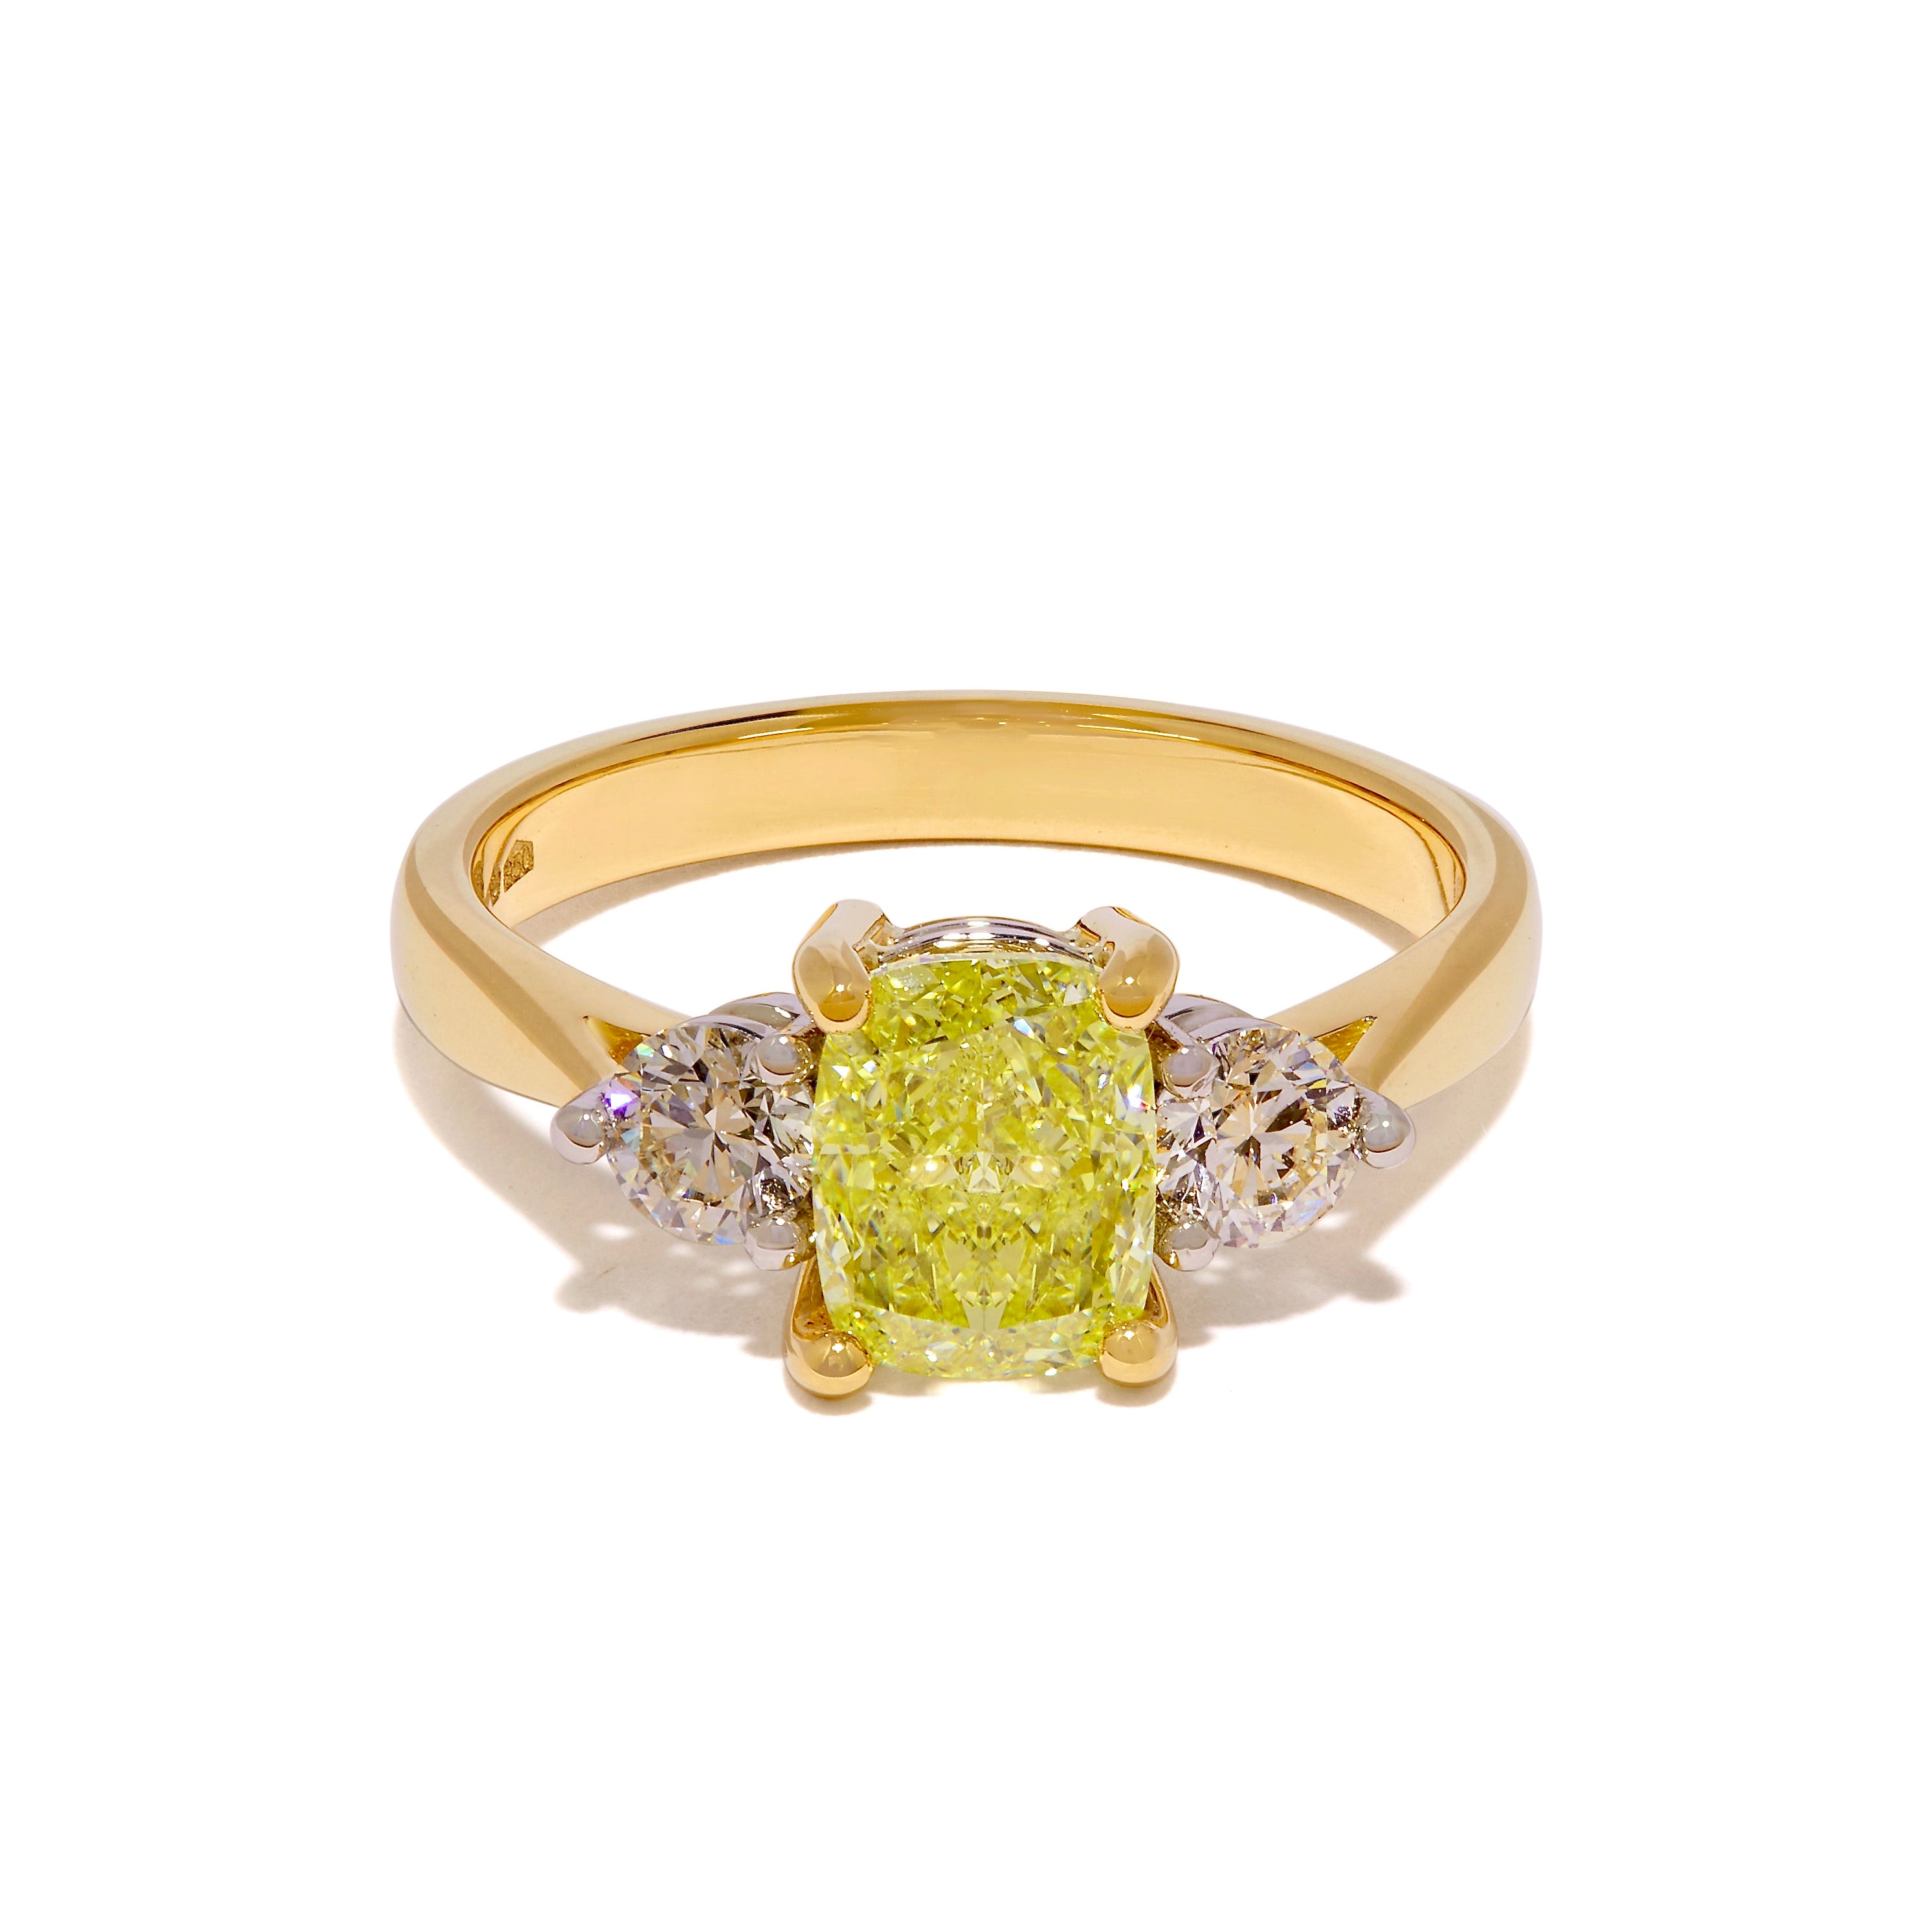 A Yellow diamond flanked by normal diamond trilogy ring in 18ct yellow gold lying on a white background